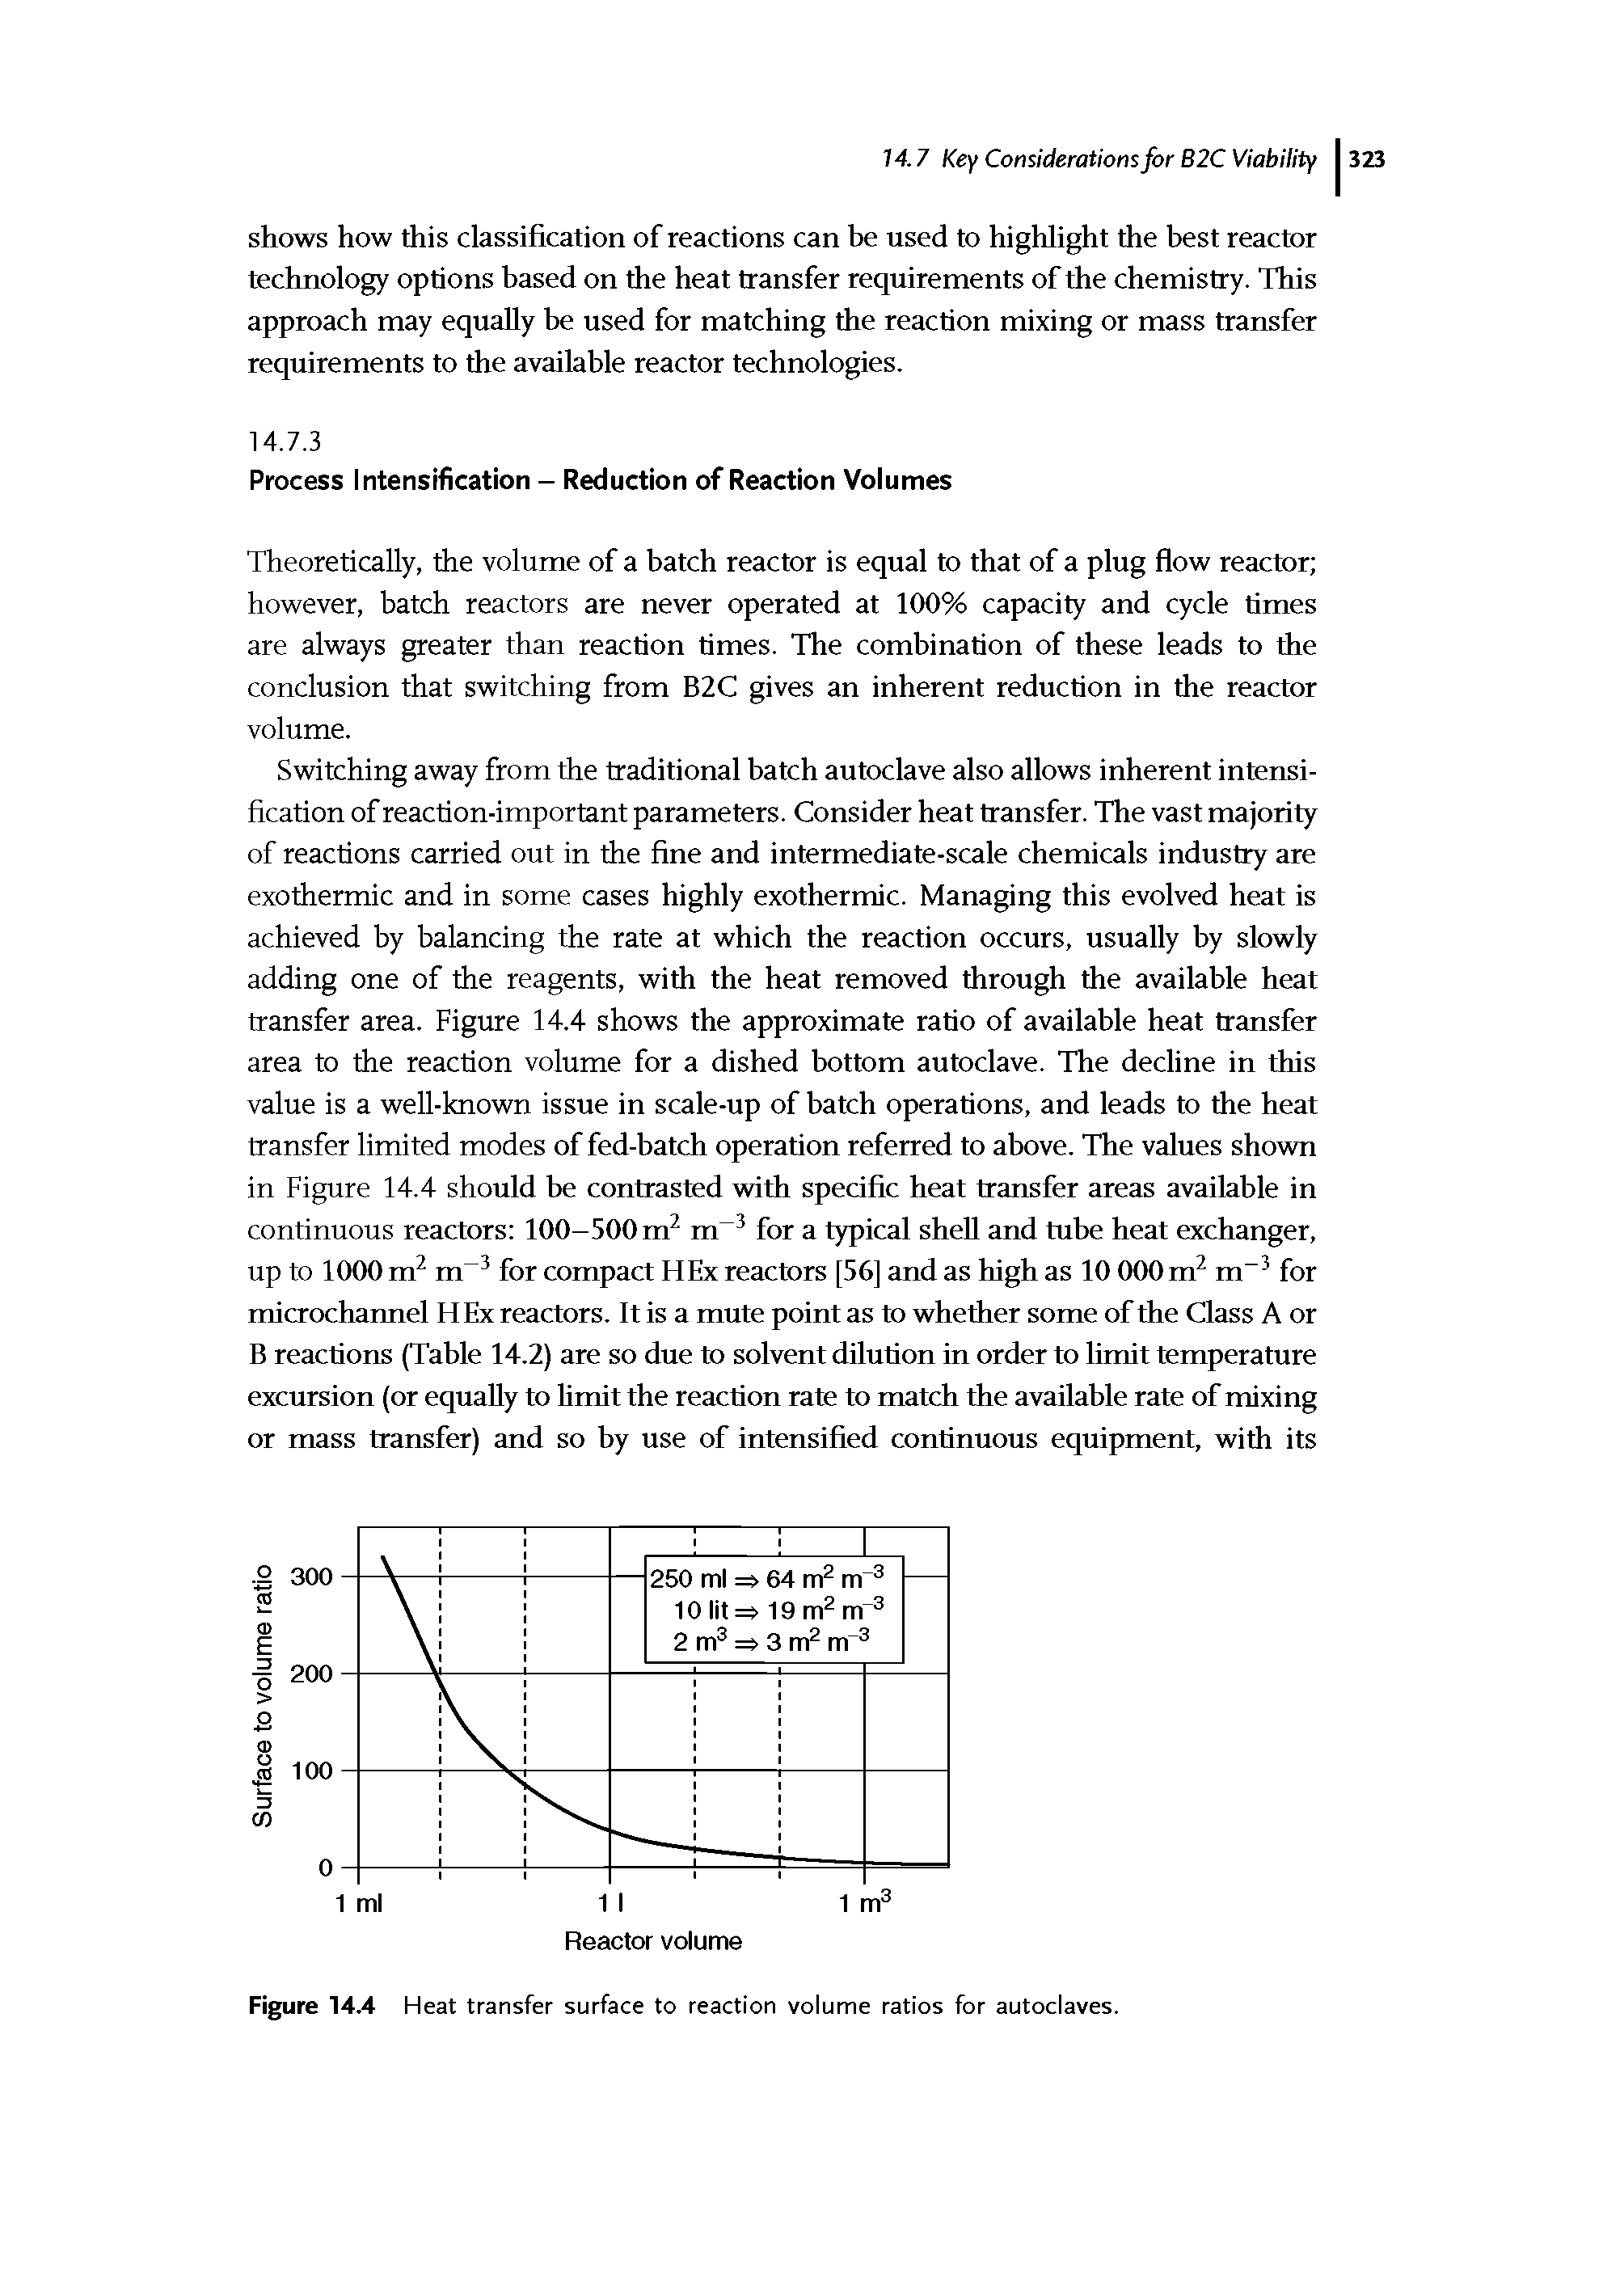 Figure 14.4 Heat transfer surface to reaction volume ratios for autoclaves.